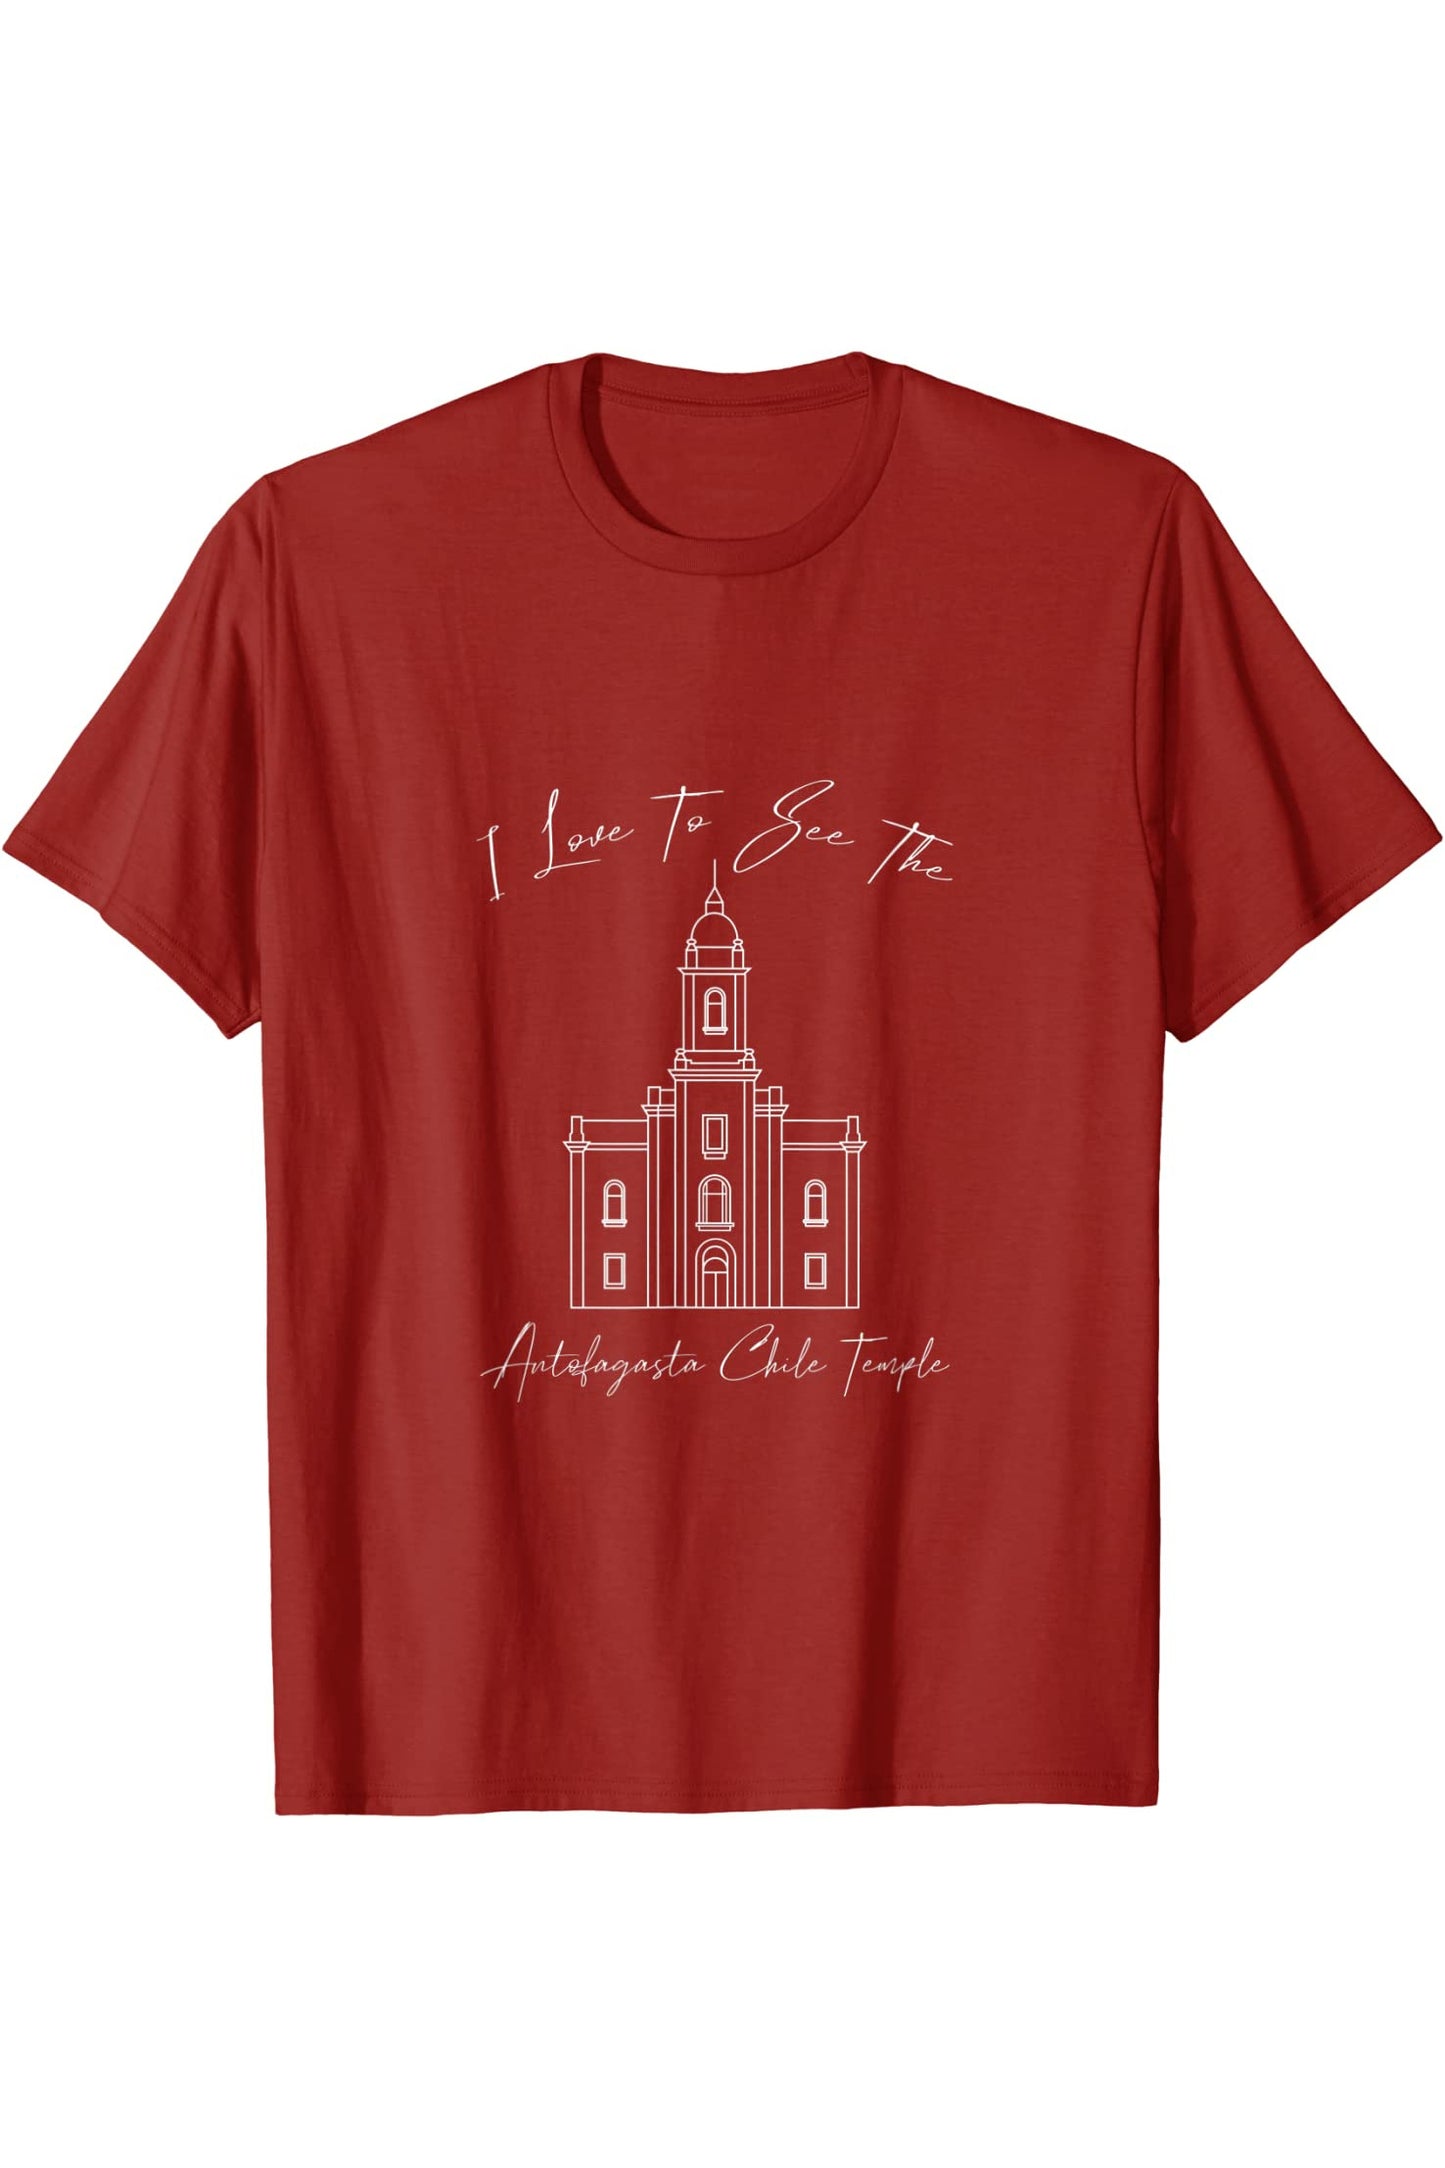 Antofagasta Chile Temple T-Shirt - Calligraphy Style (English) US